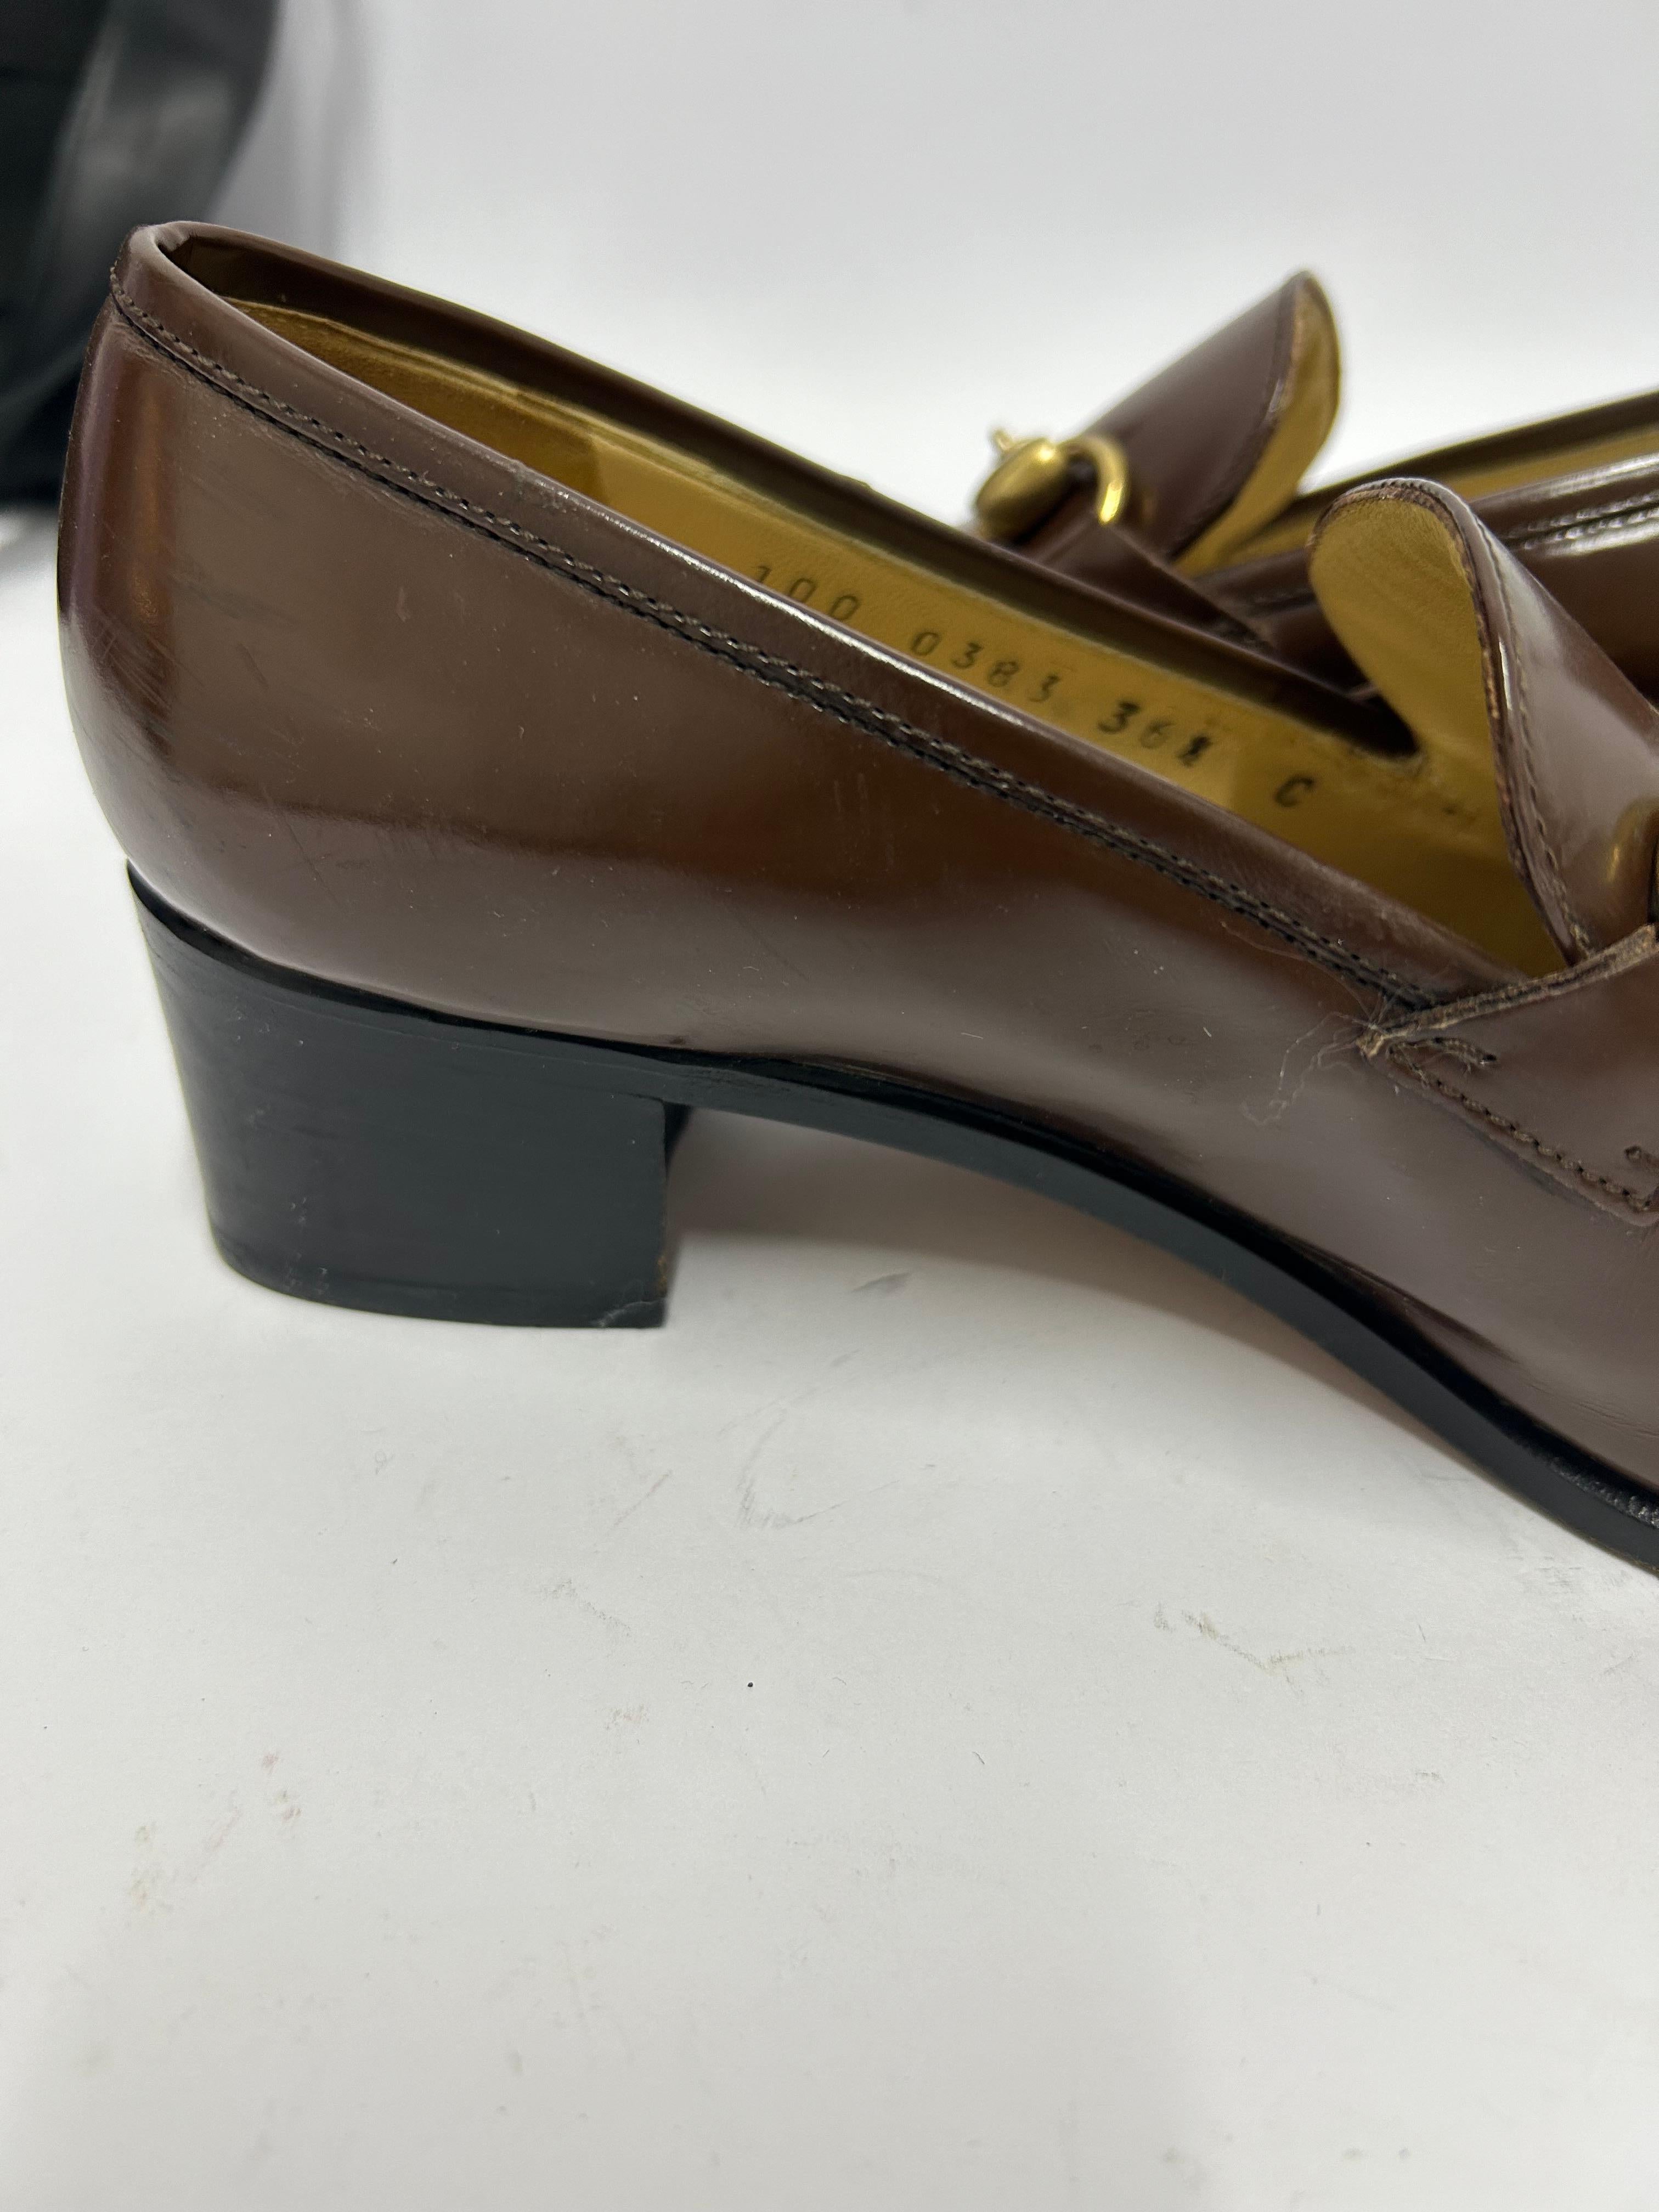 Gucci Horsebit Leather Loafers Size EU 36.5 For Sale 10